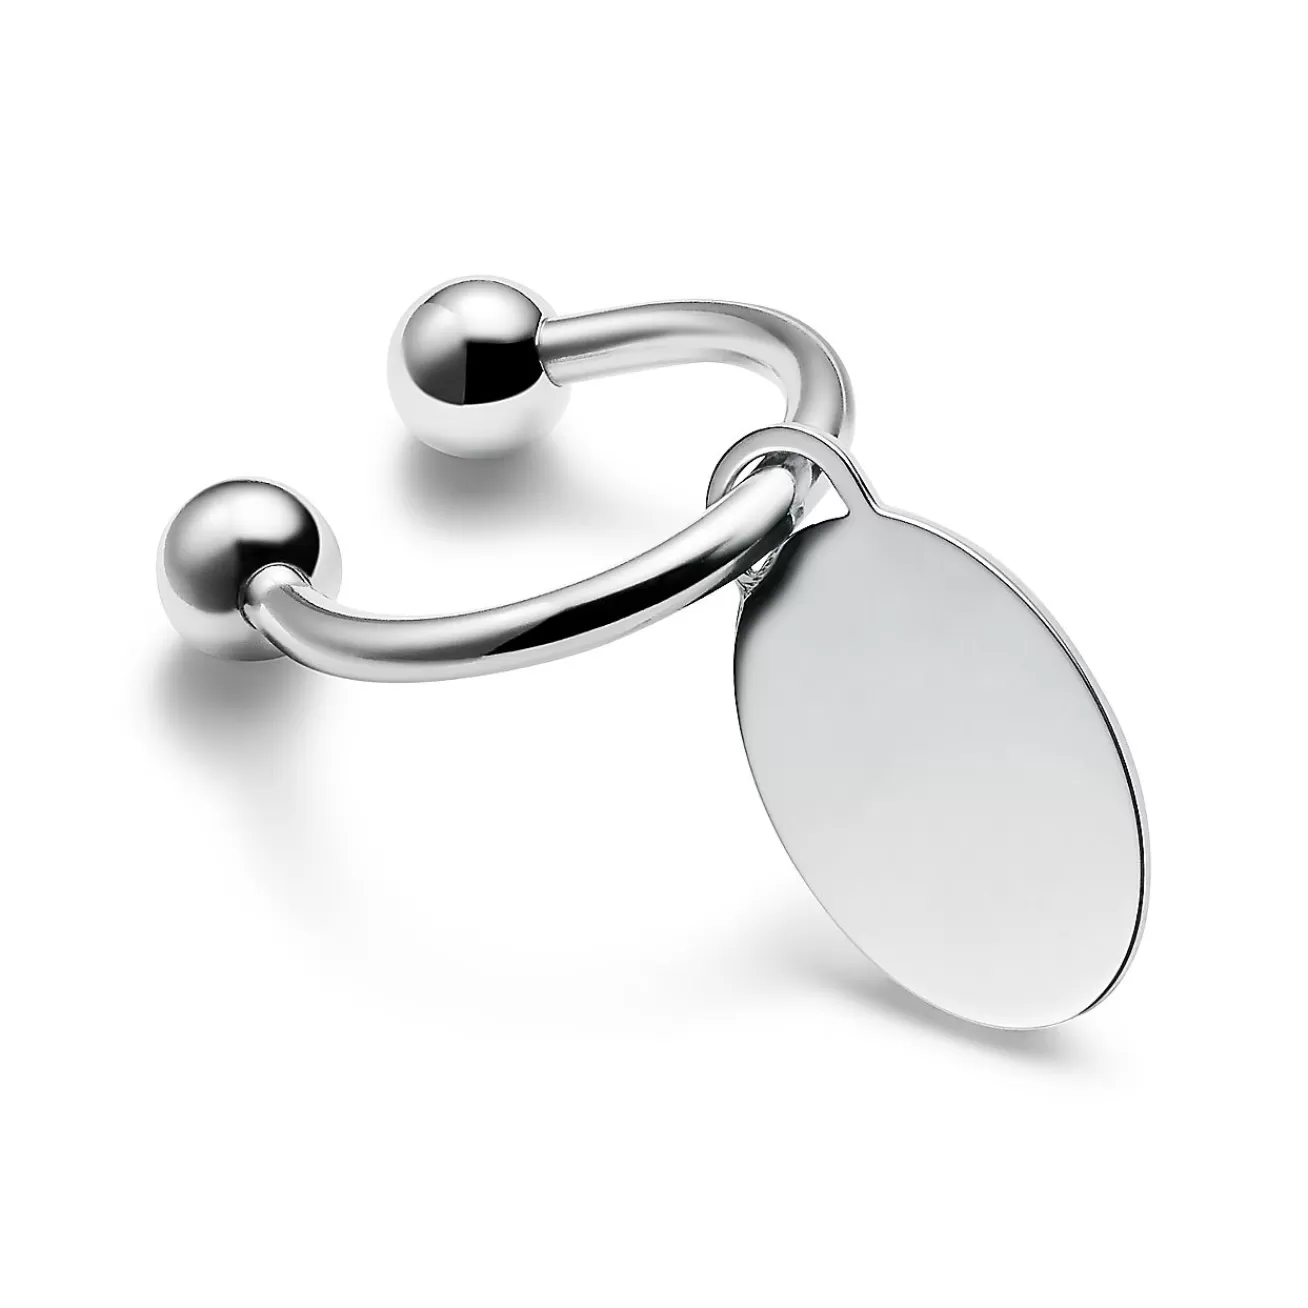 Tiffany & Co. Personal Essentials Oval Tag Screwball Key Ring in Sterling Silver | ^Women Gifts to Personalize | Key Rings